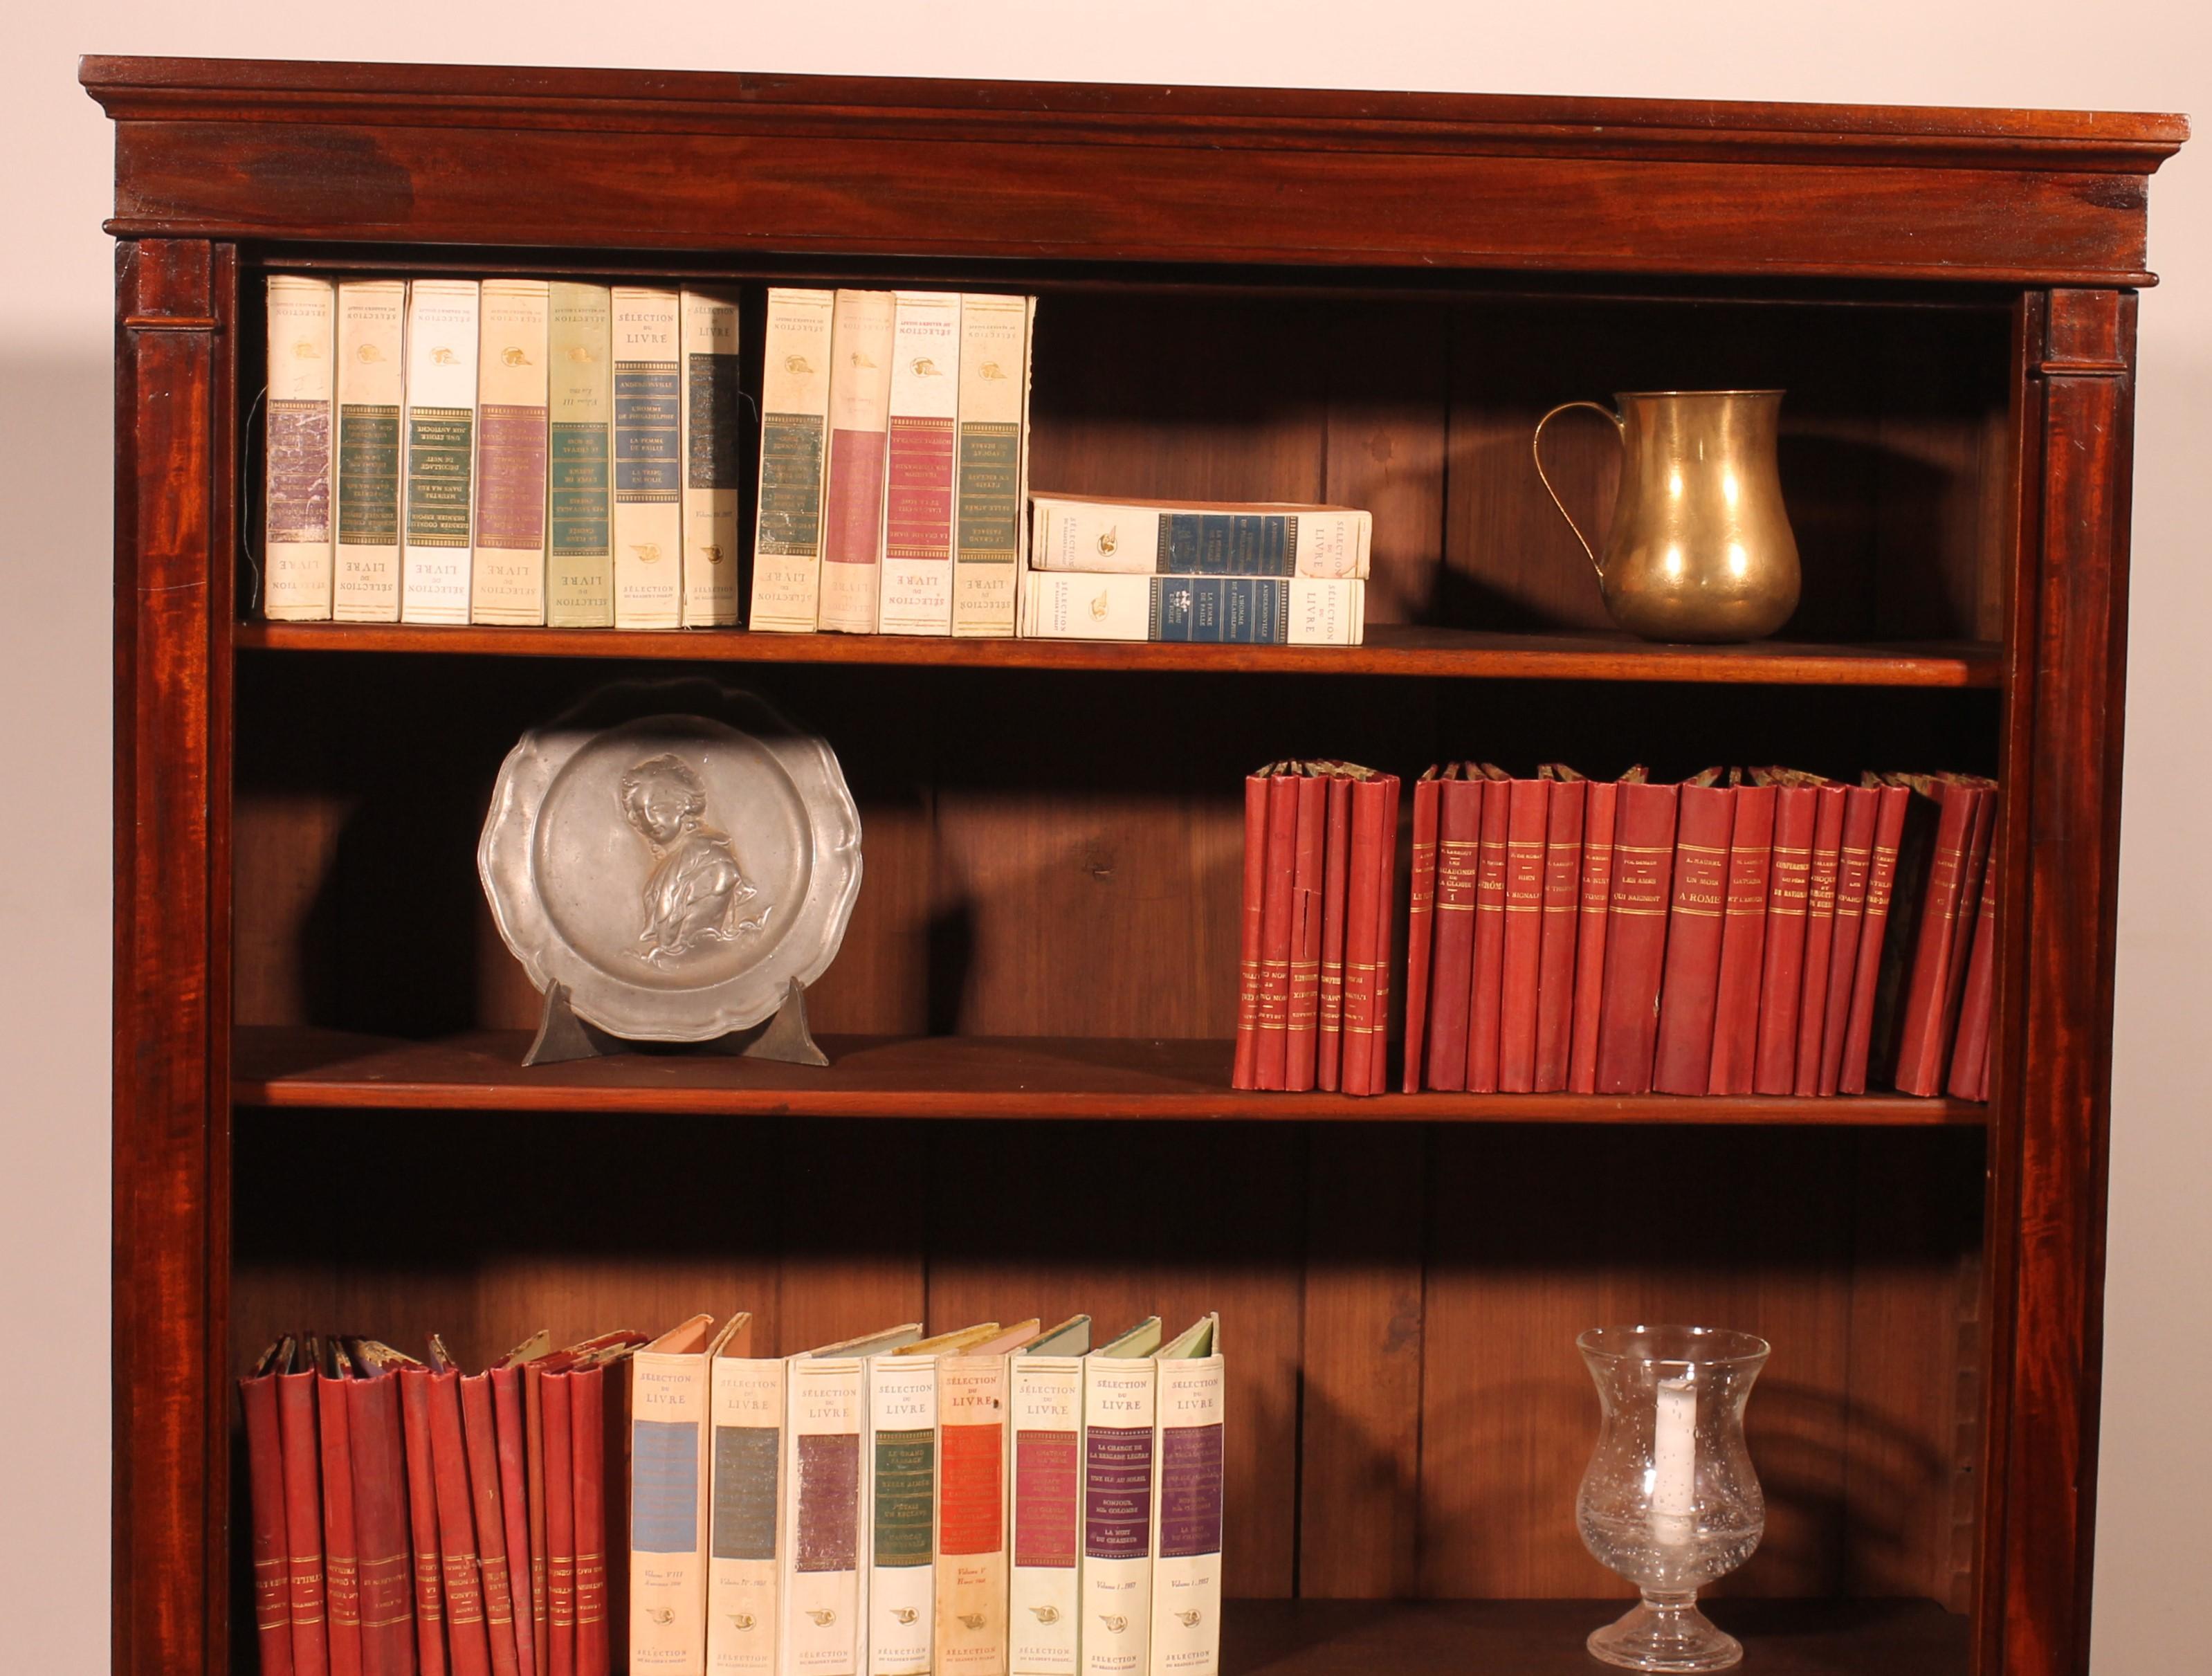 British Open Bookcase In Mahogany From The 19th Century-england For Sale